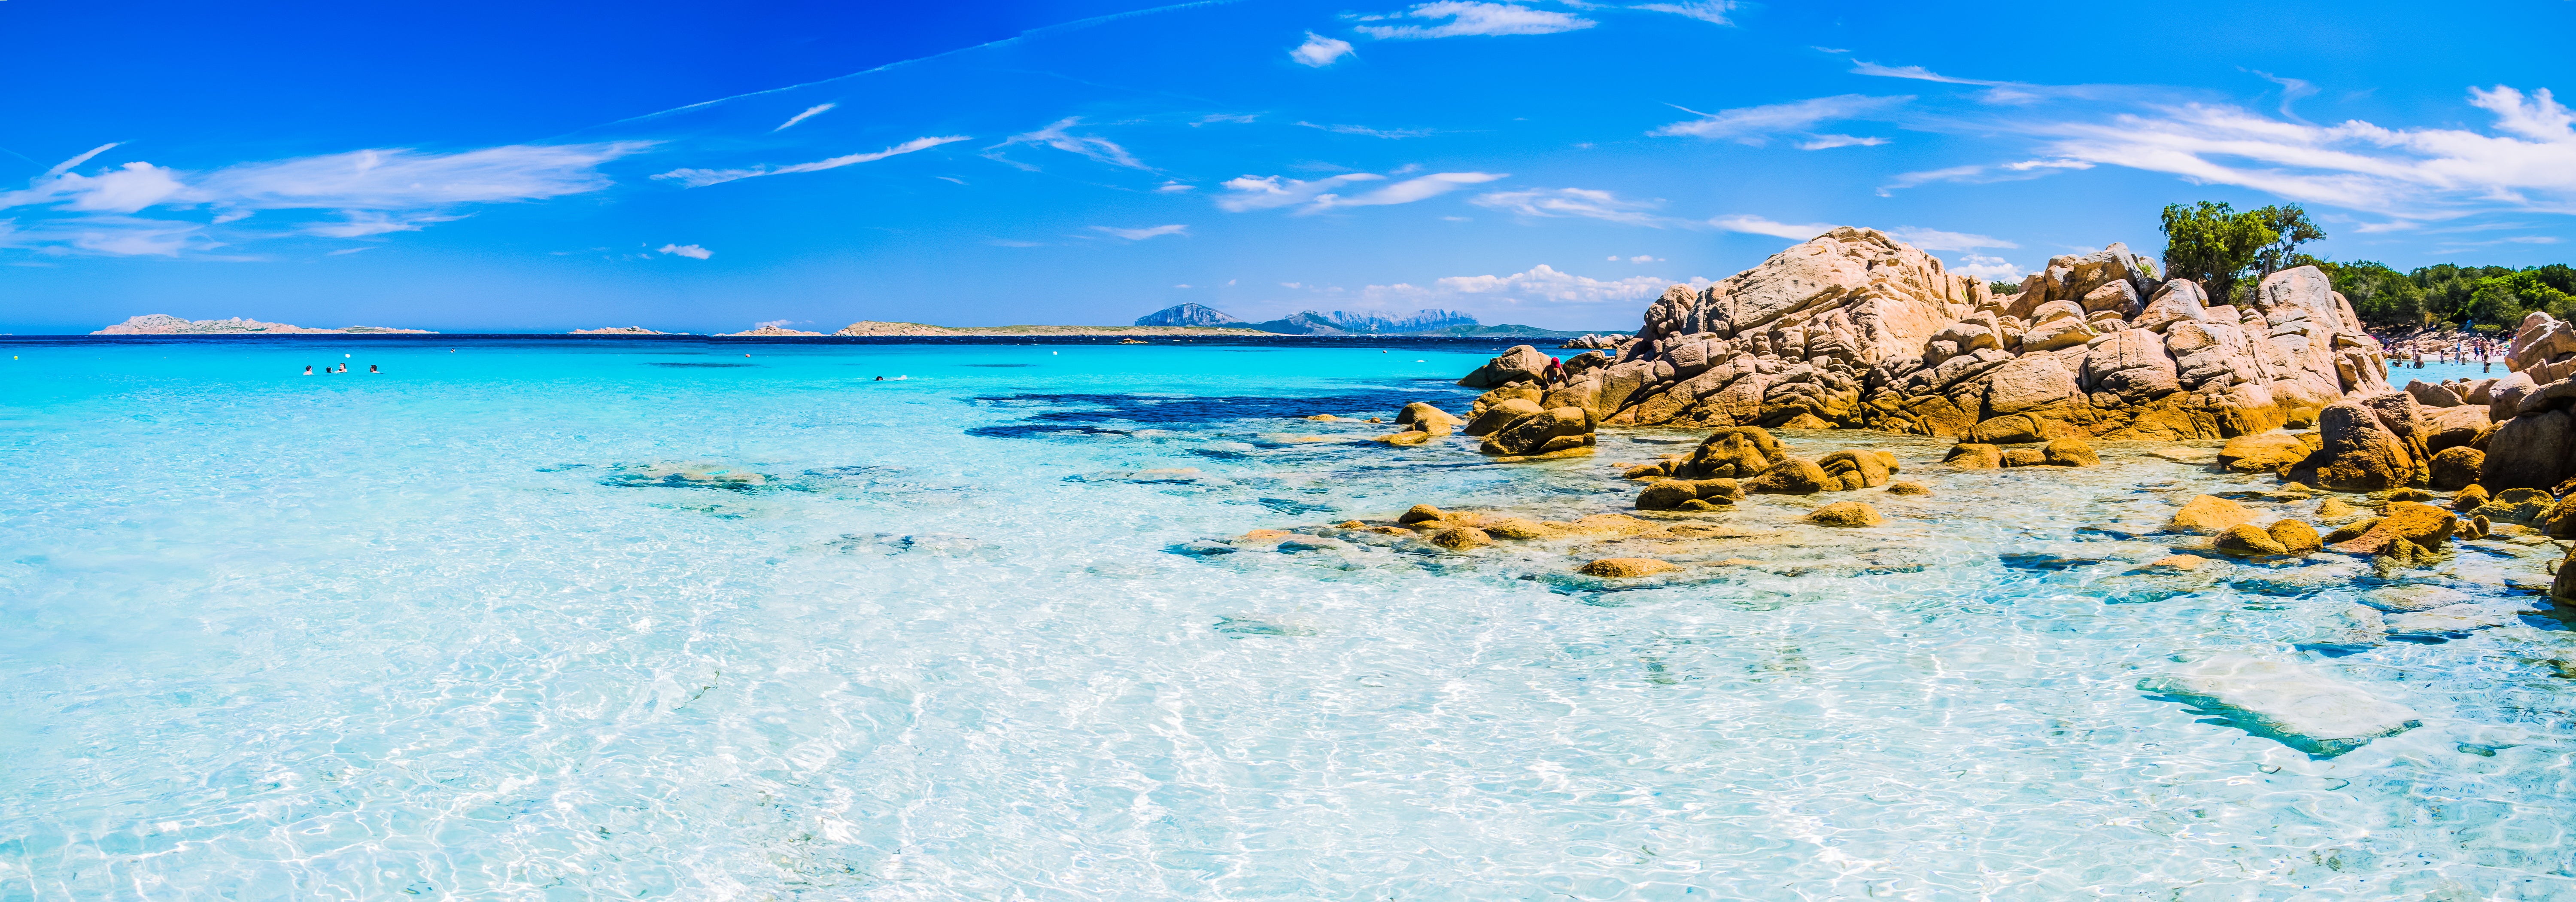 Sardinia has some of Italy’s clearest waters